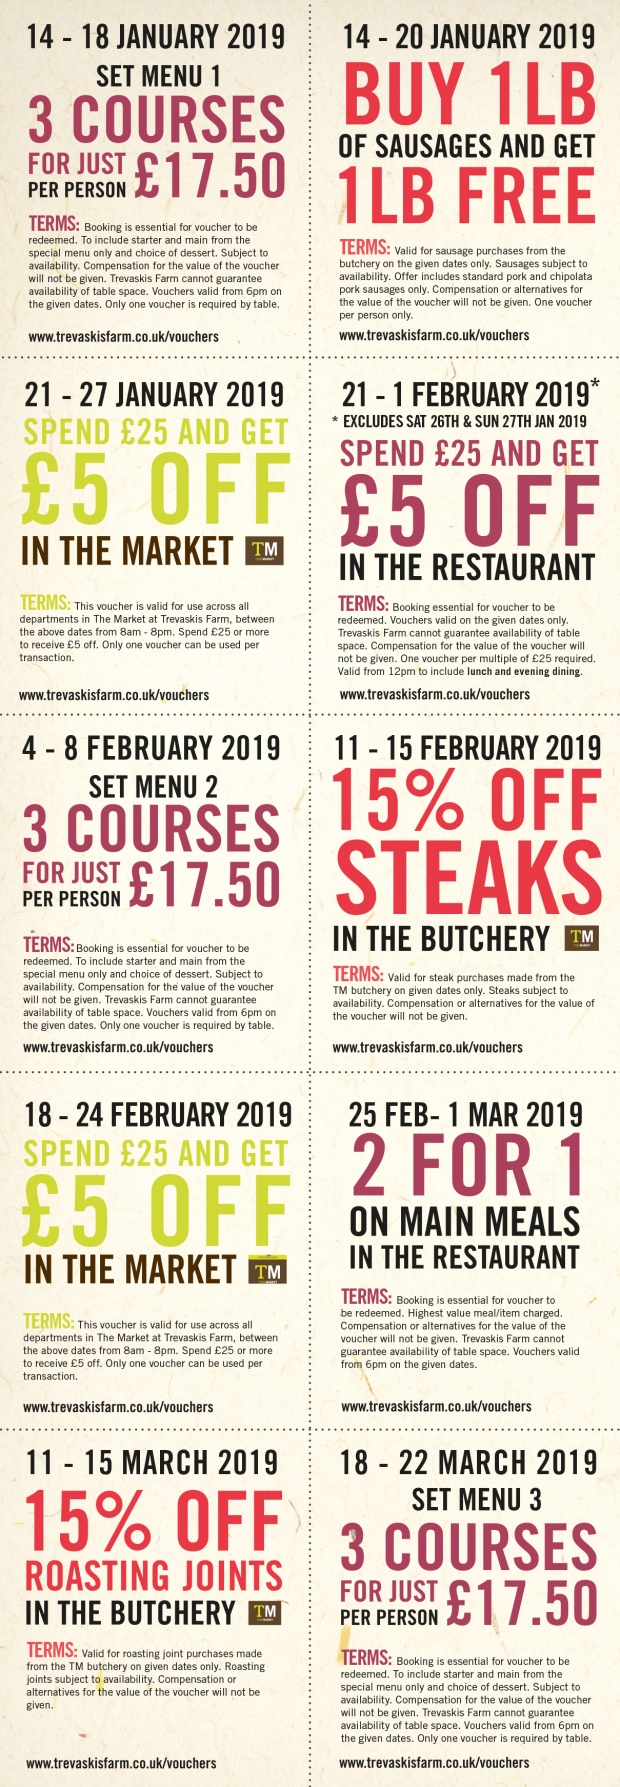 OUR NEW YEAR OFFERS ARE HERE!